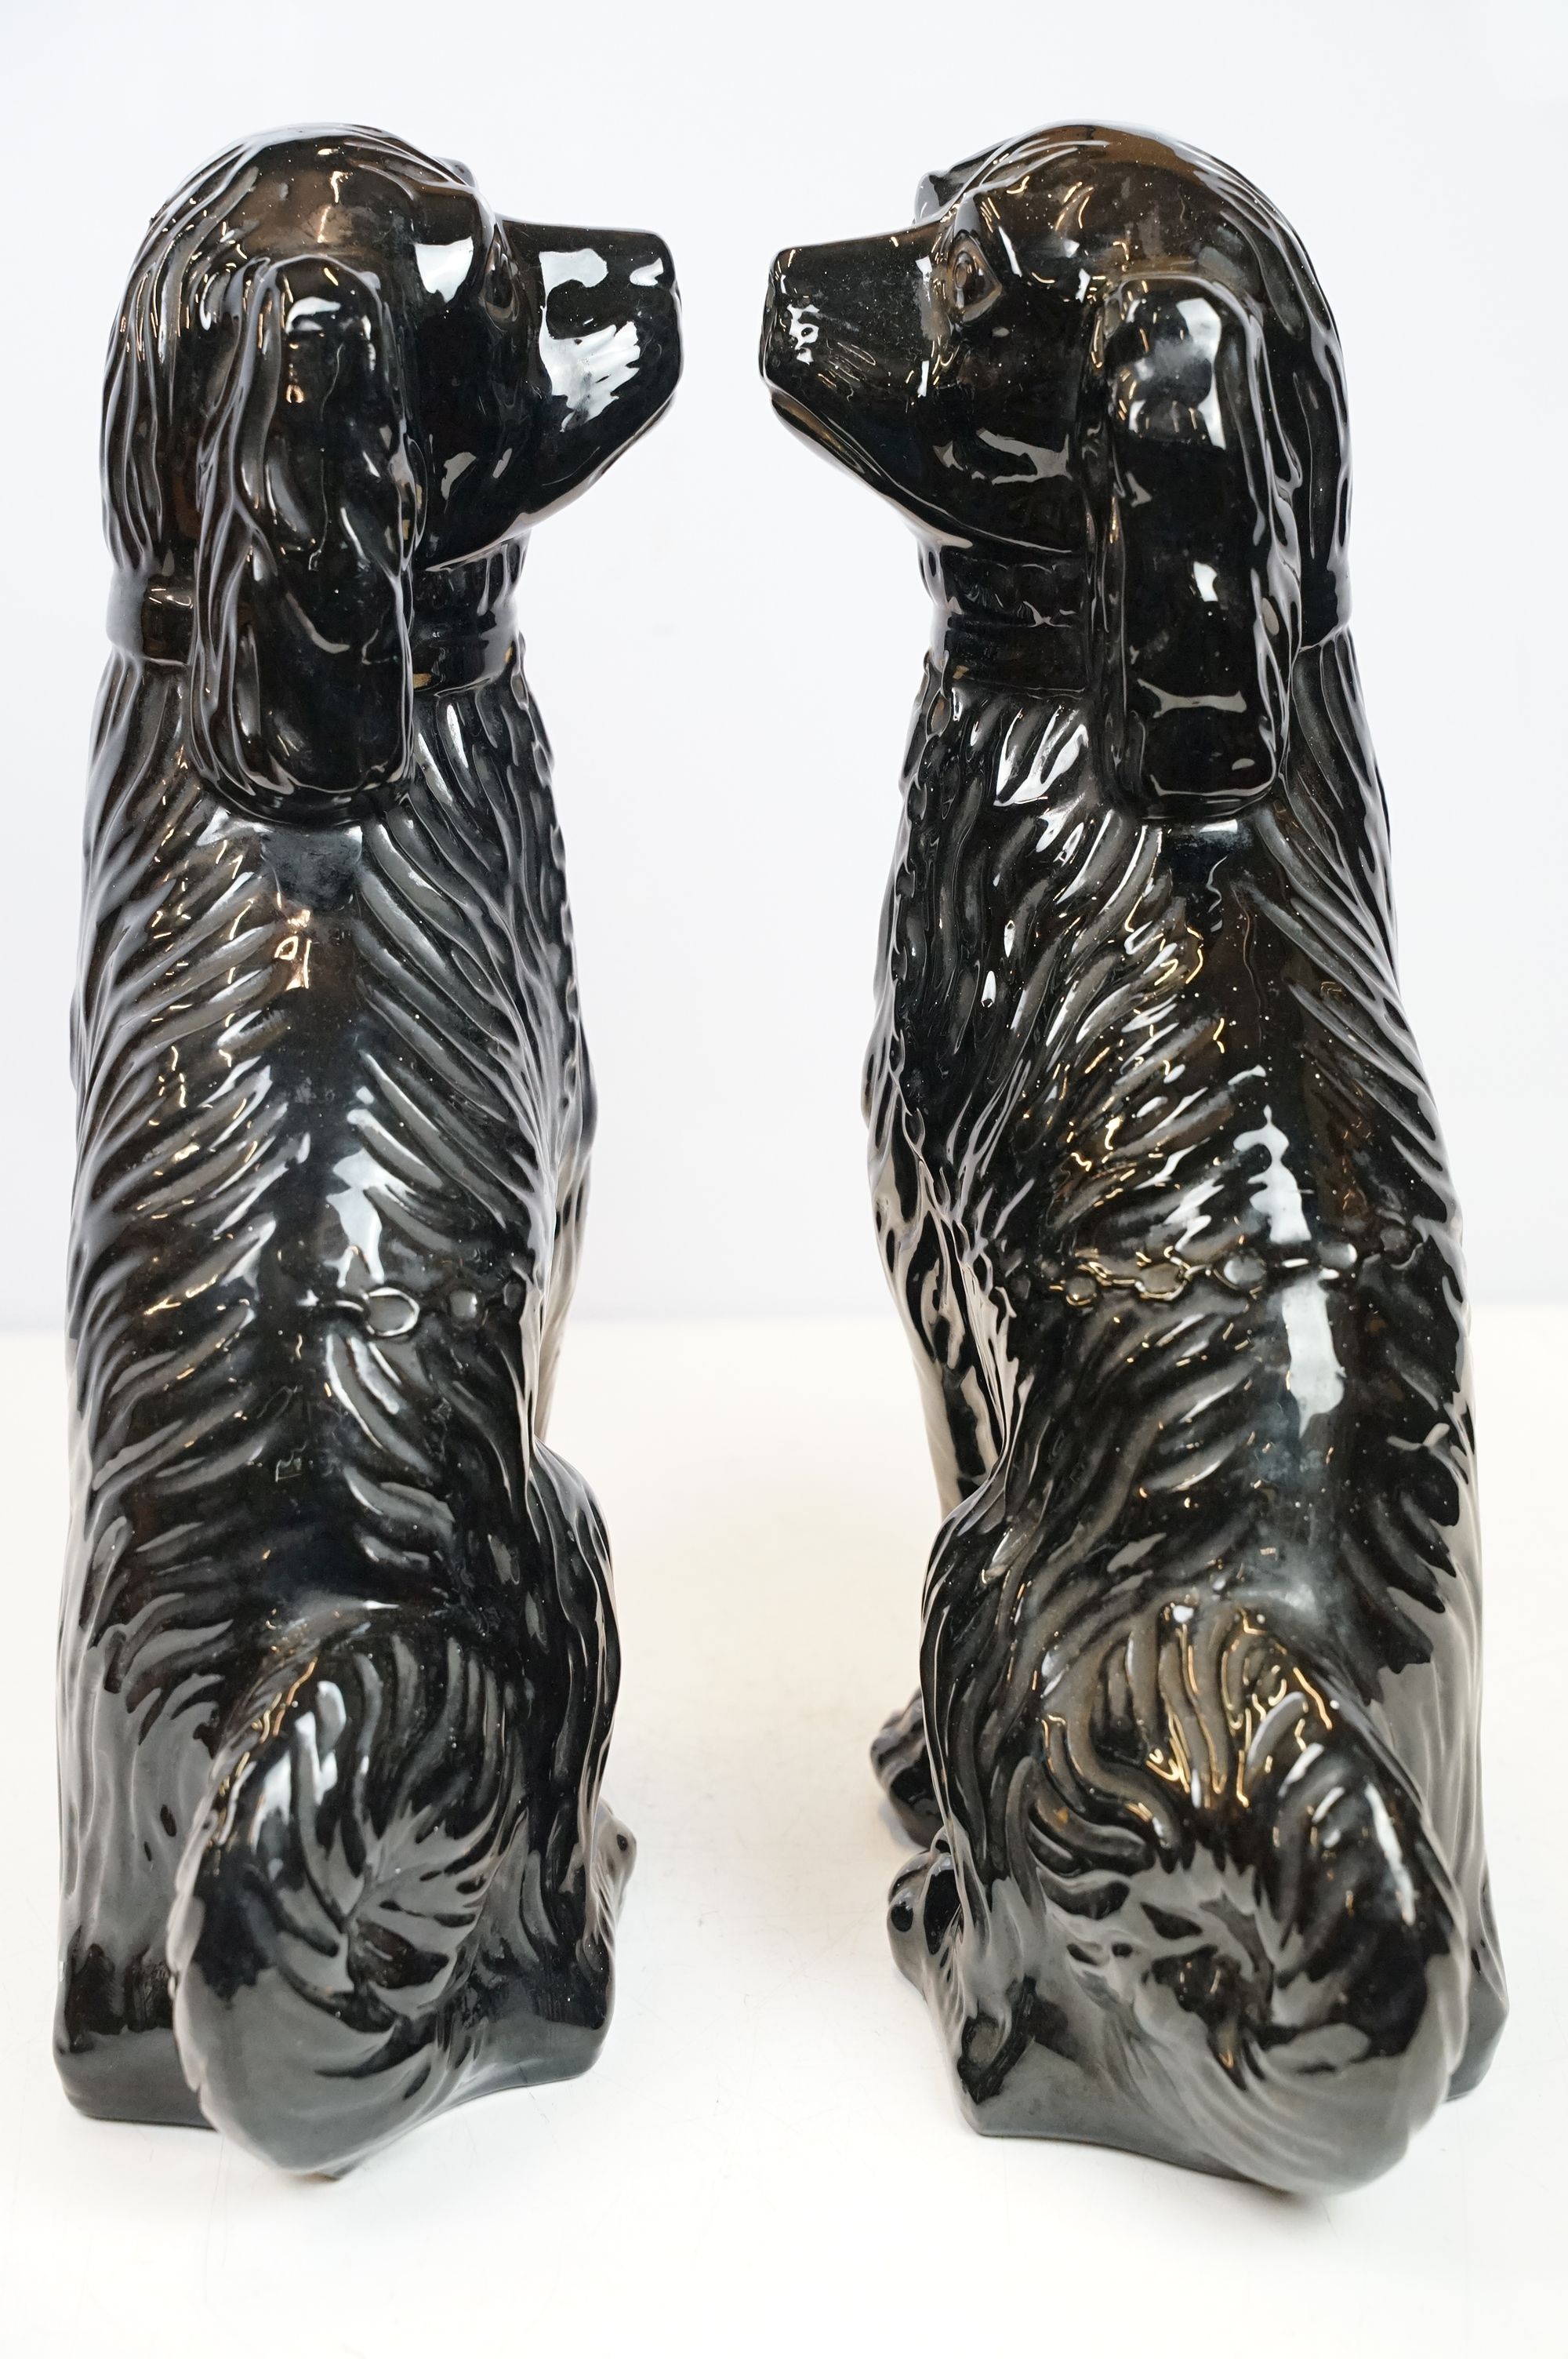 Pair of black cats in Staffordshire style, 35cm high - Image 5 of 8